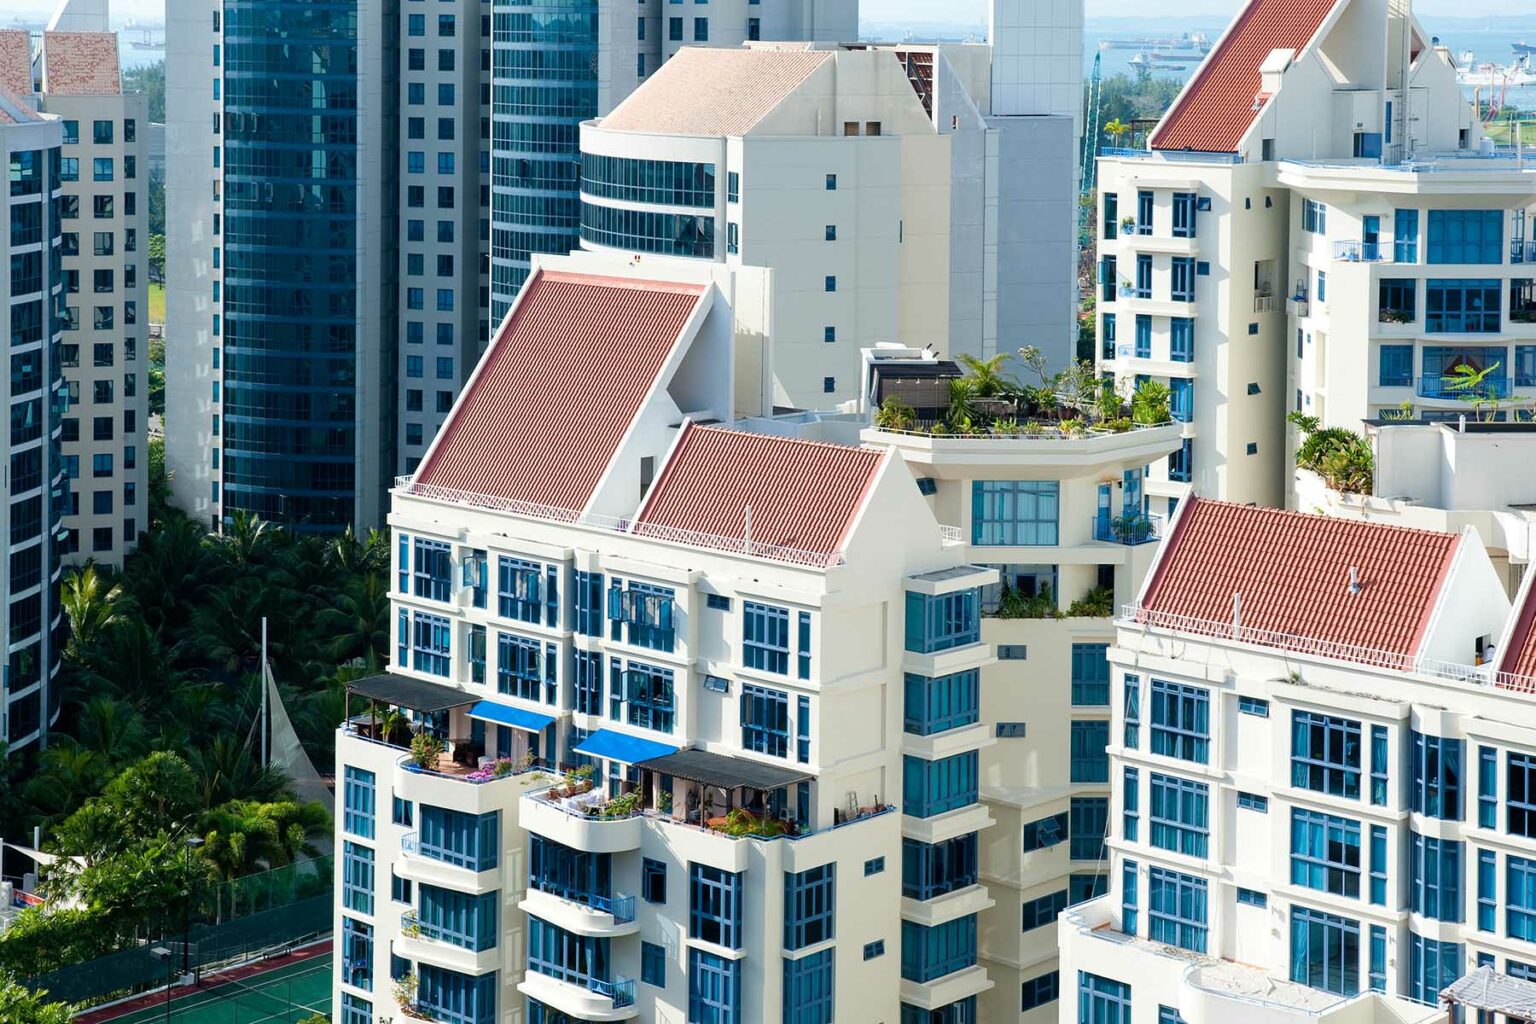 Expensive looking apartment buildings on Singapore's East Coast.